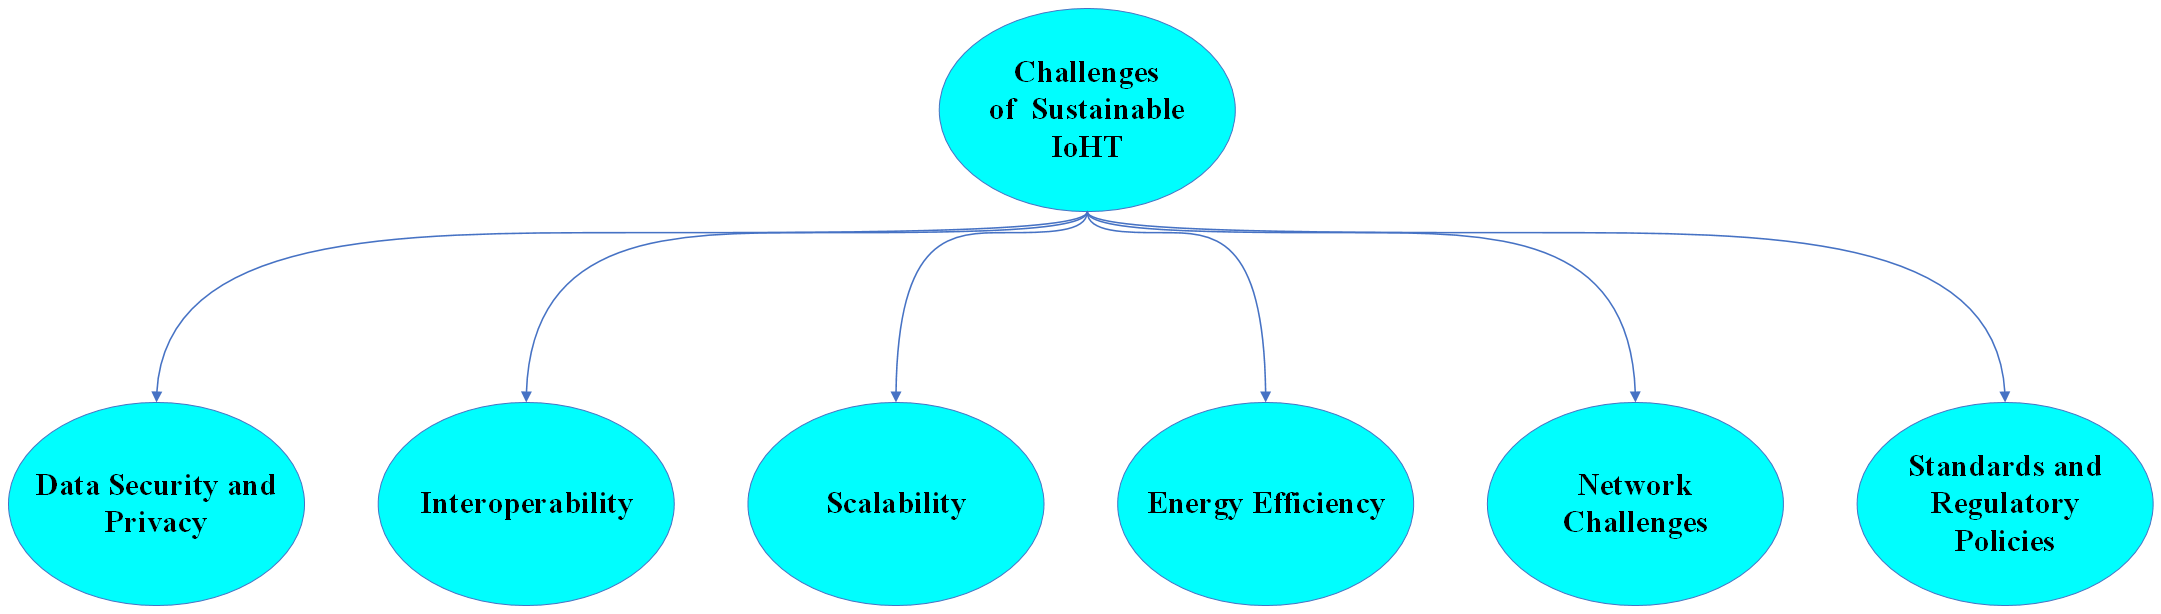 fig 1 challenges of sustainable IoHT